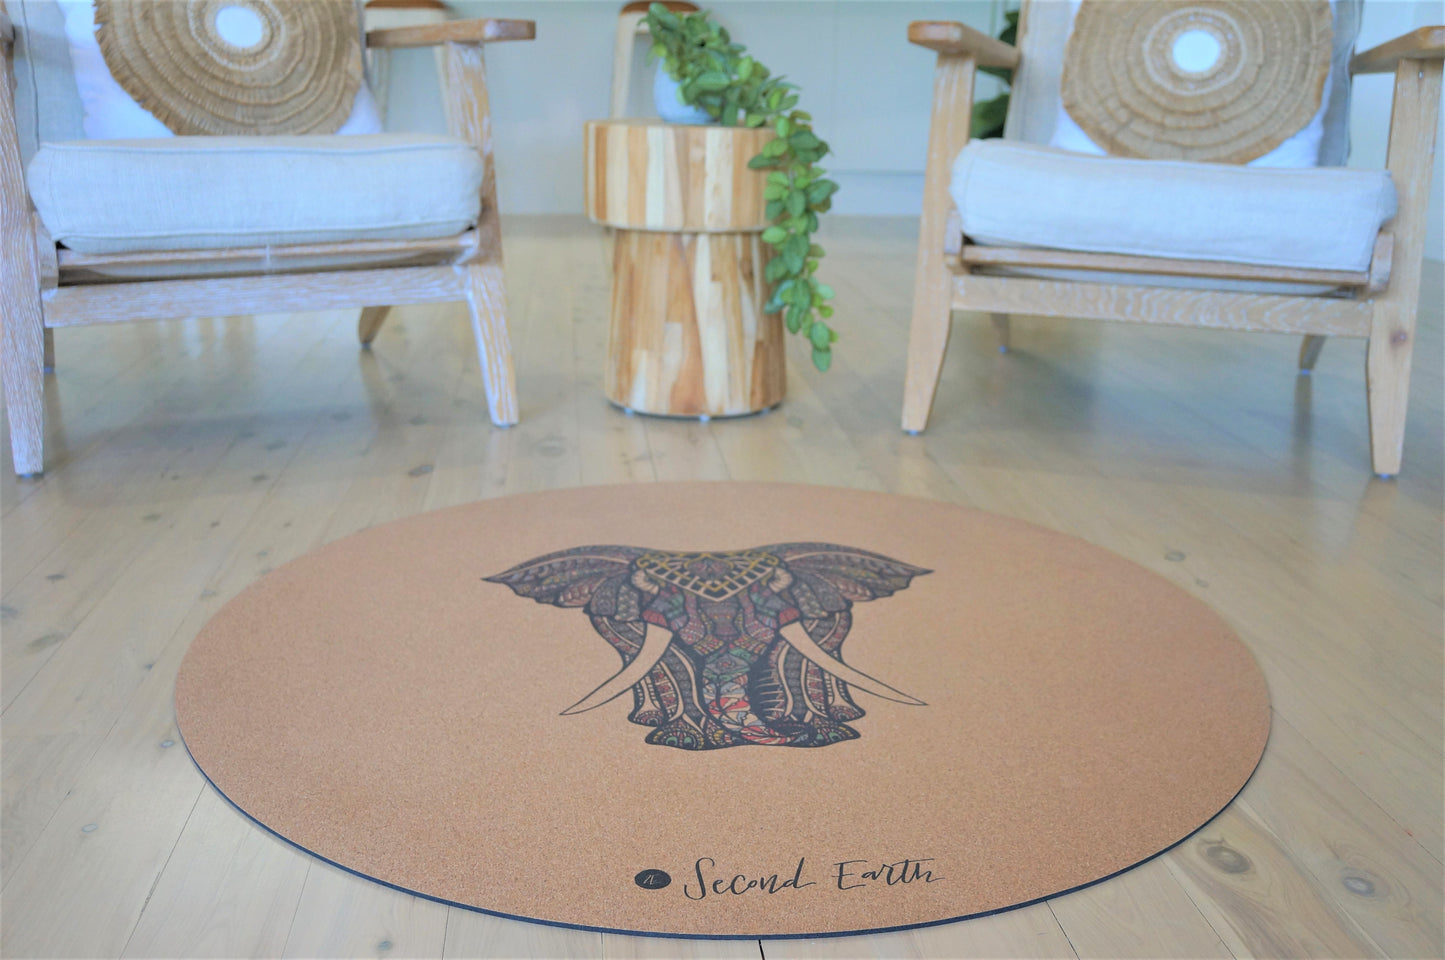 Best play mat non toxic - Second Earth 2E Play - Natural and eco friendly